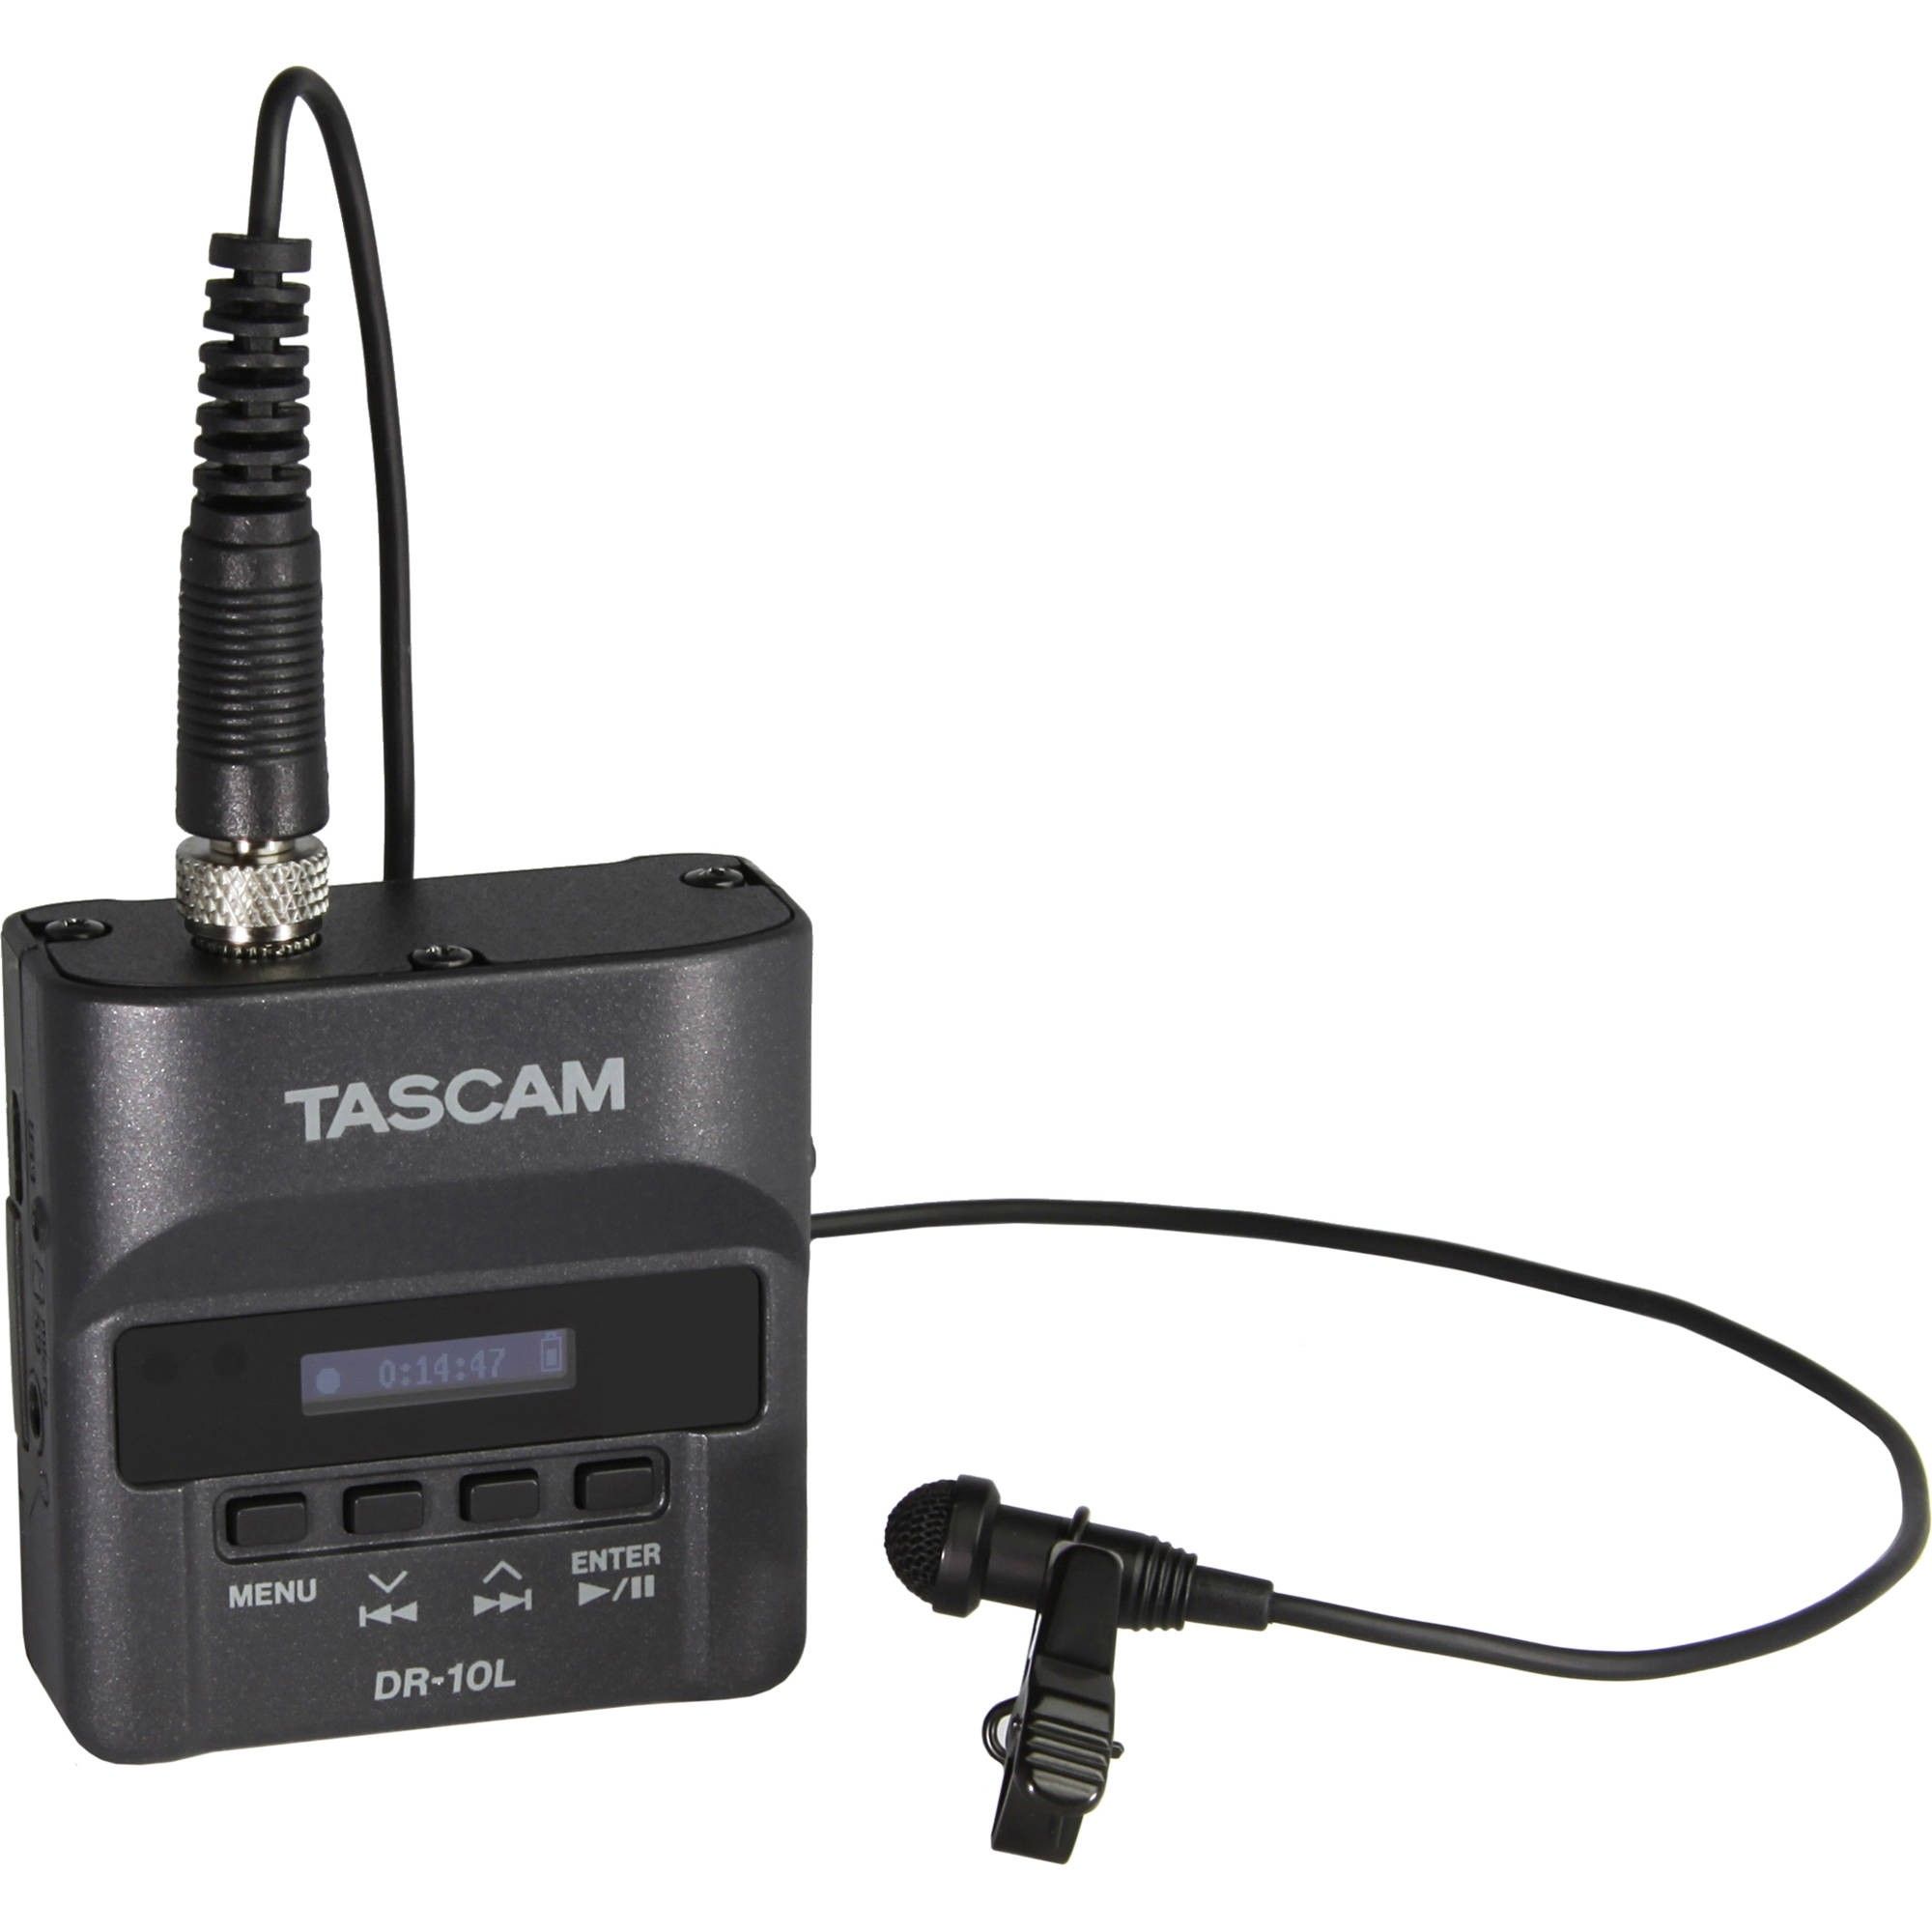 Tascam DR-10L Micro Portable Audio Recorder with Lavalier Microphone